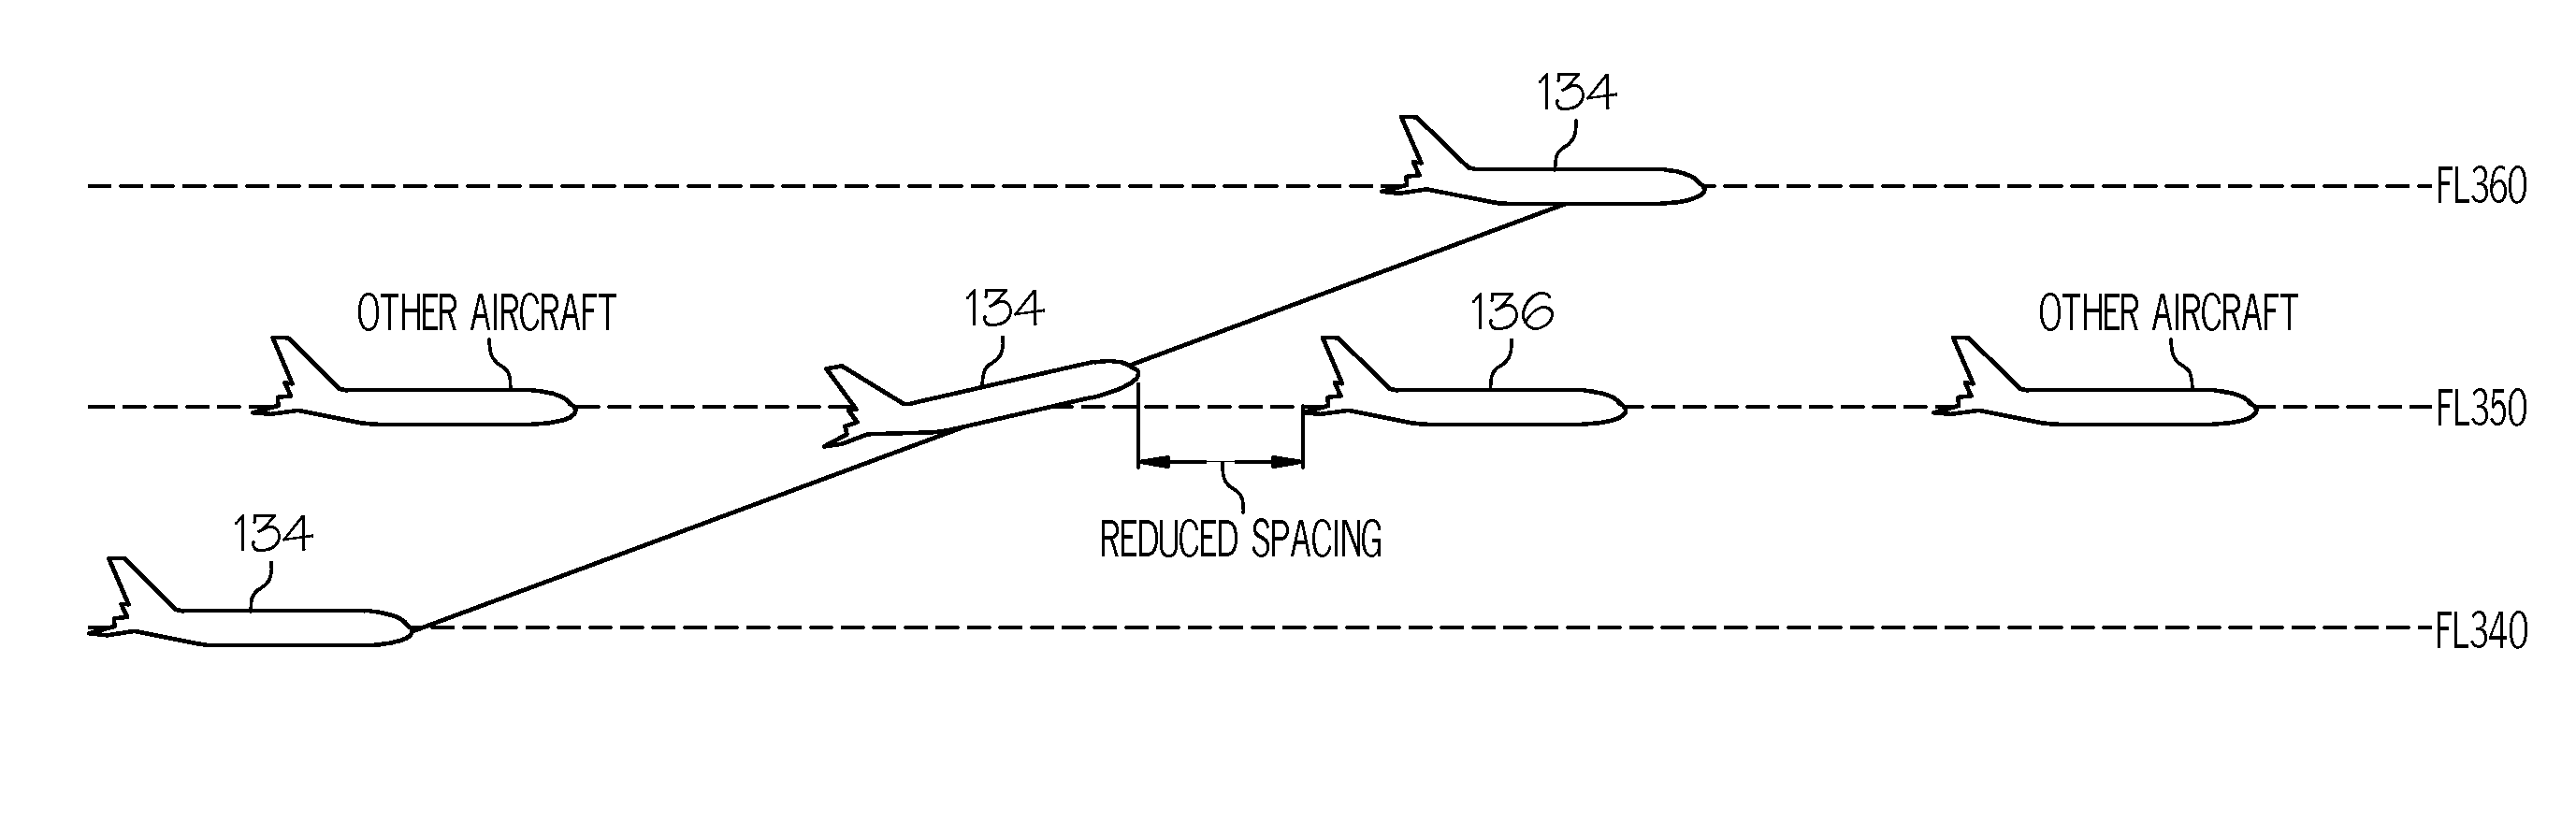 System and method for displaying in-trail procedure (ITP) opportunities on an aircraft cockpit display